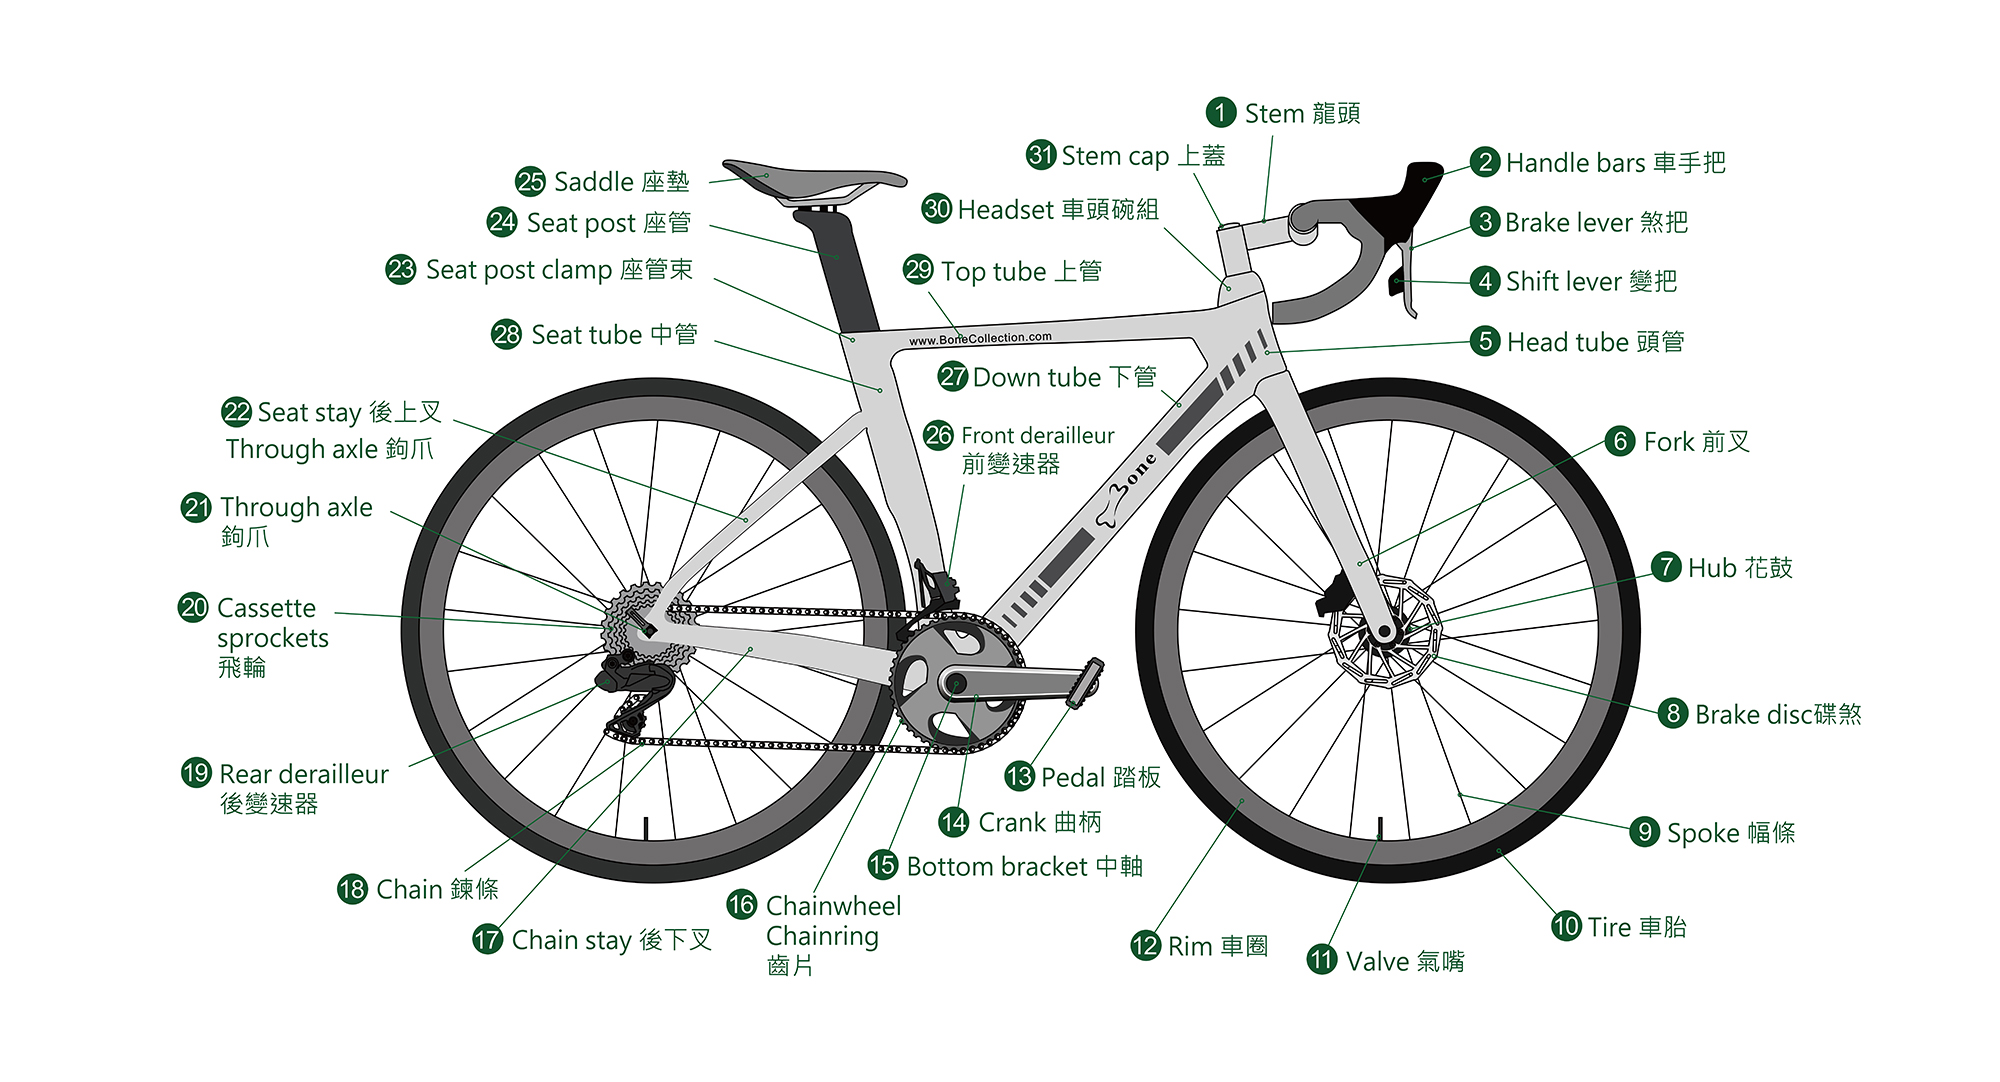 Bike Part Names With Definitions